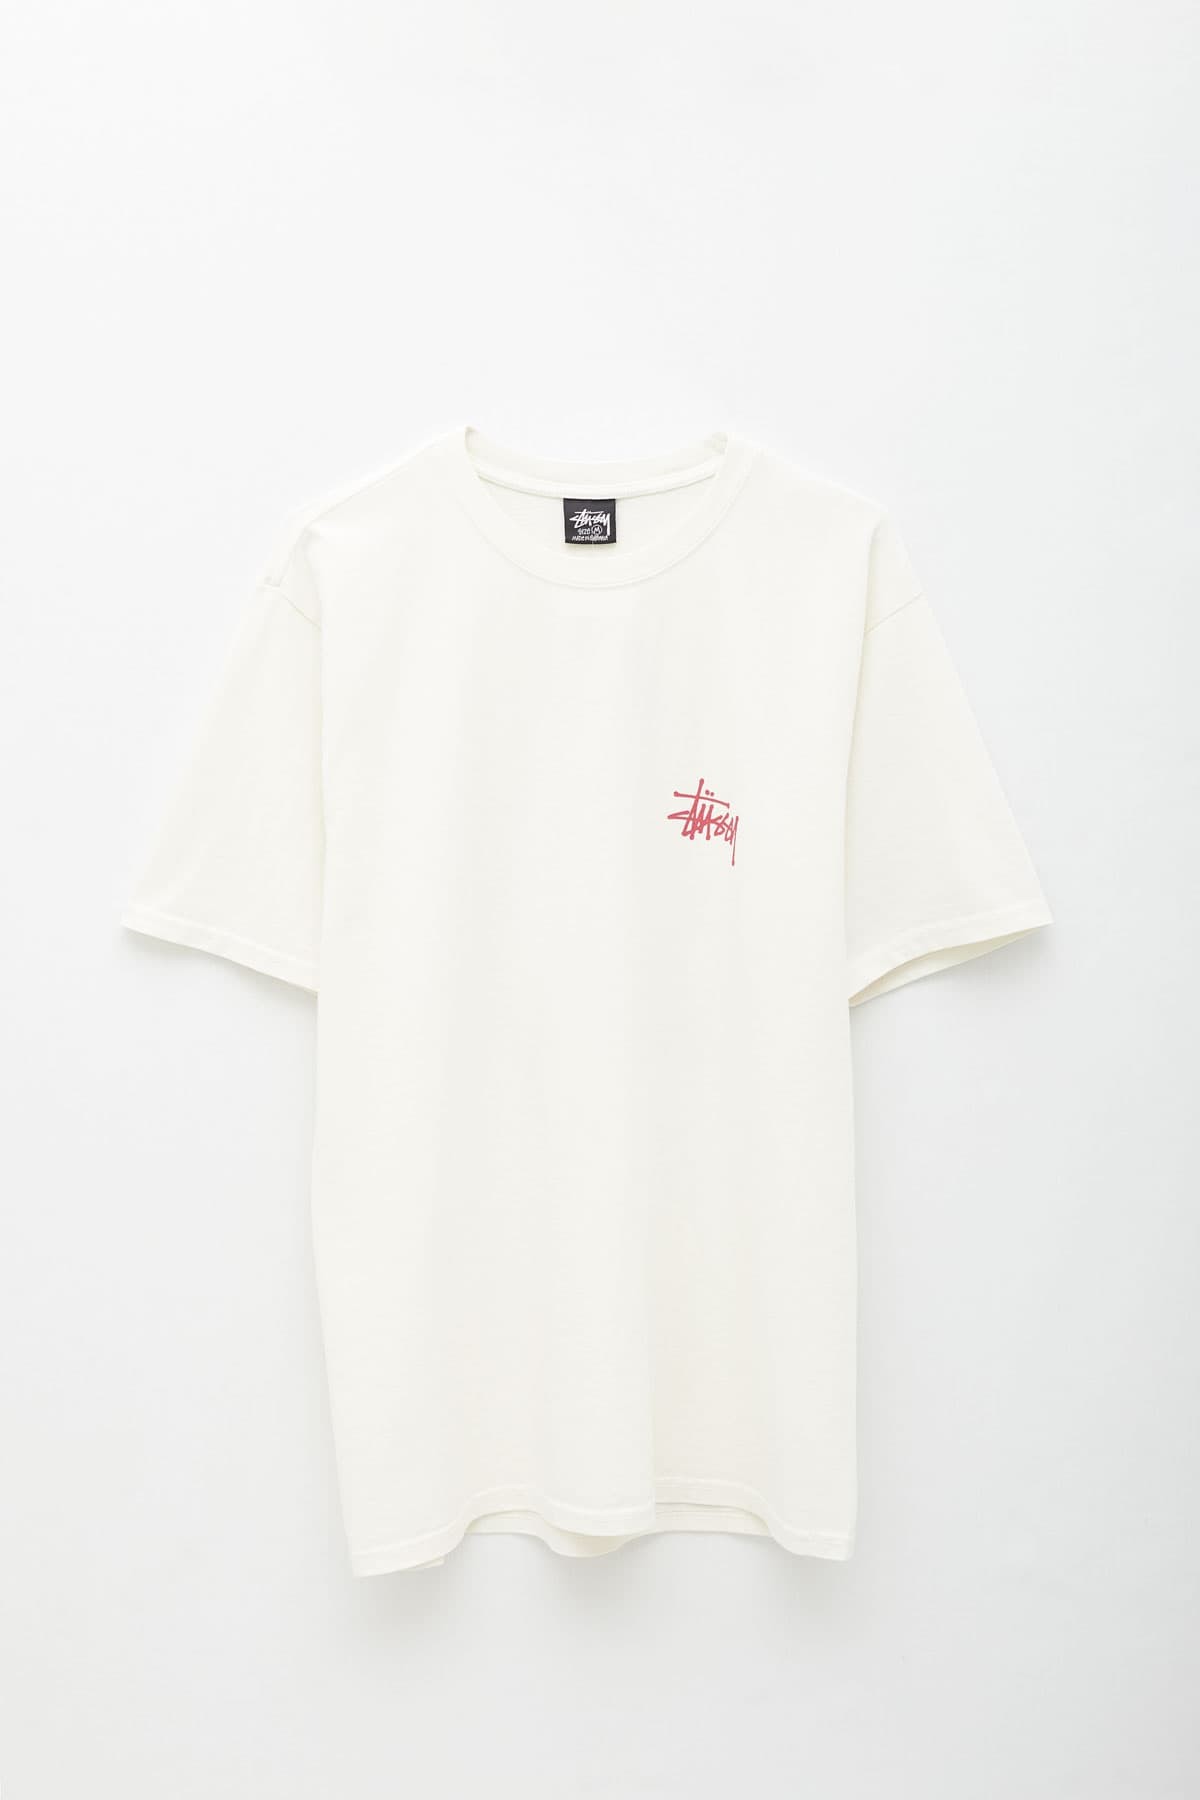 STUSSY NATURAL S PIG DYED T-SHIRT IAMNUE